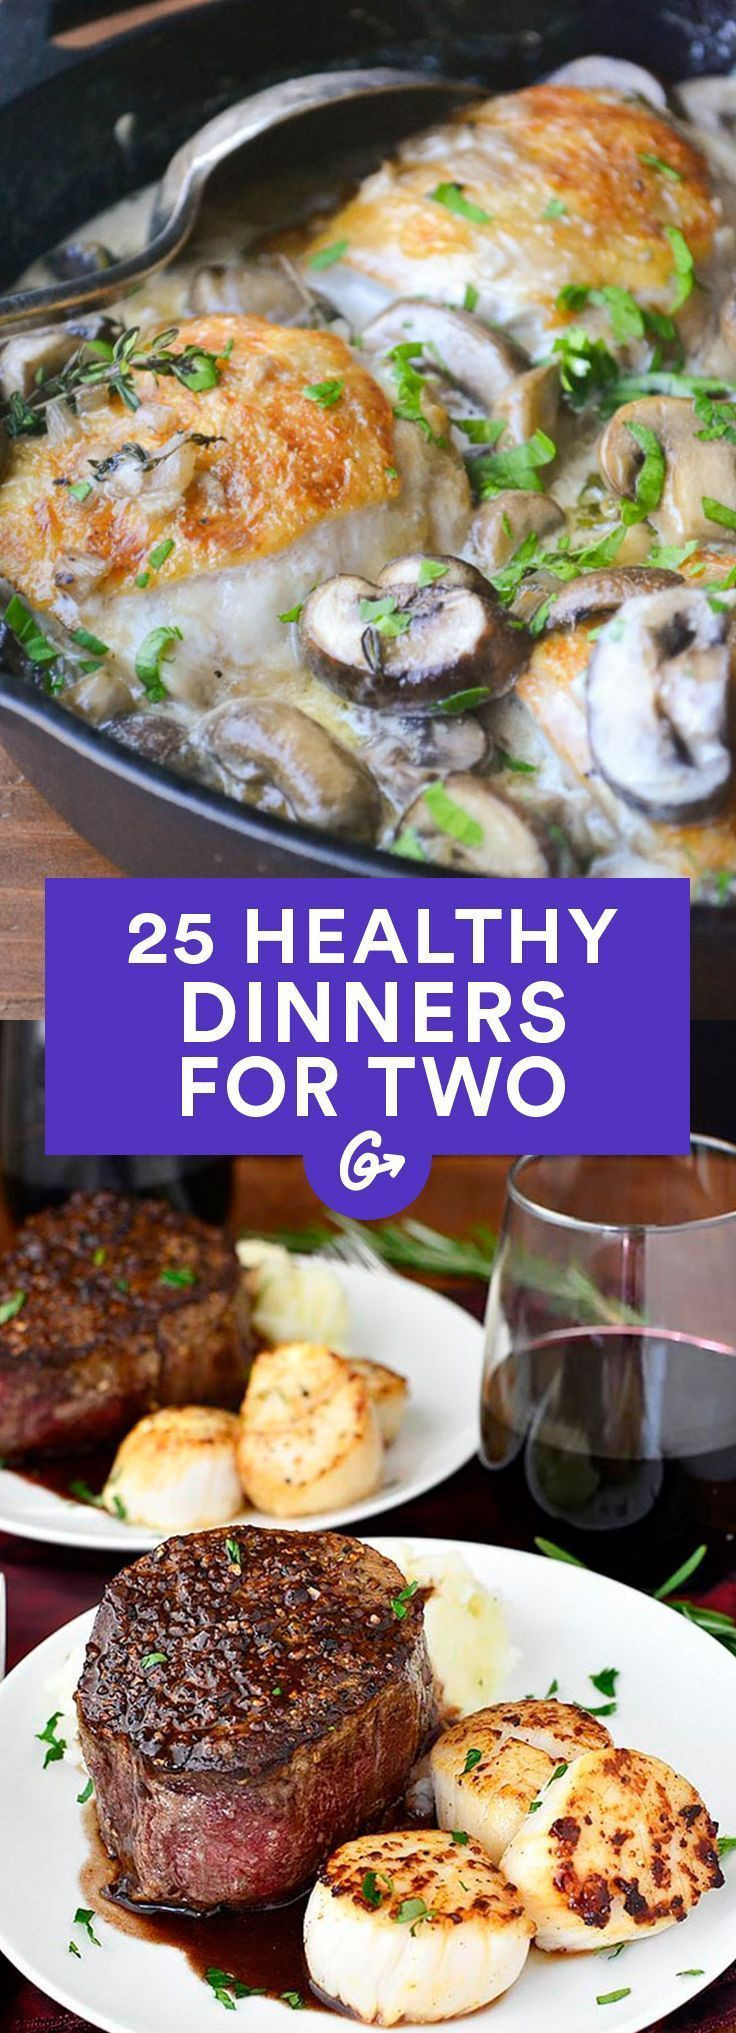 Healthy Dinners for Two On A Budget Elegant 21 Best Ideas Dinners for Two A Bud Best Round Up